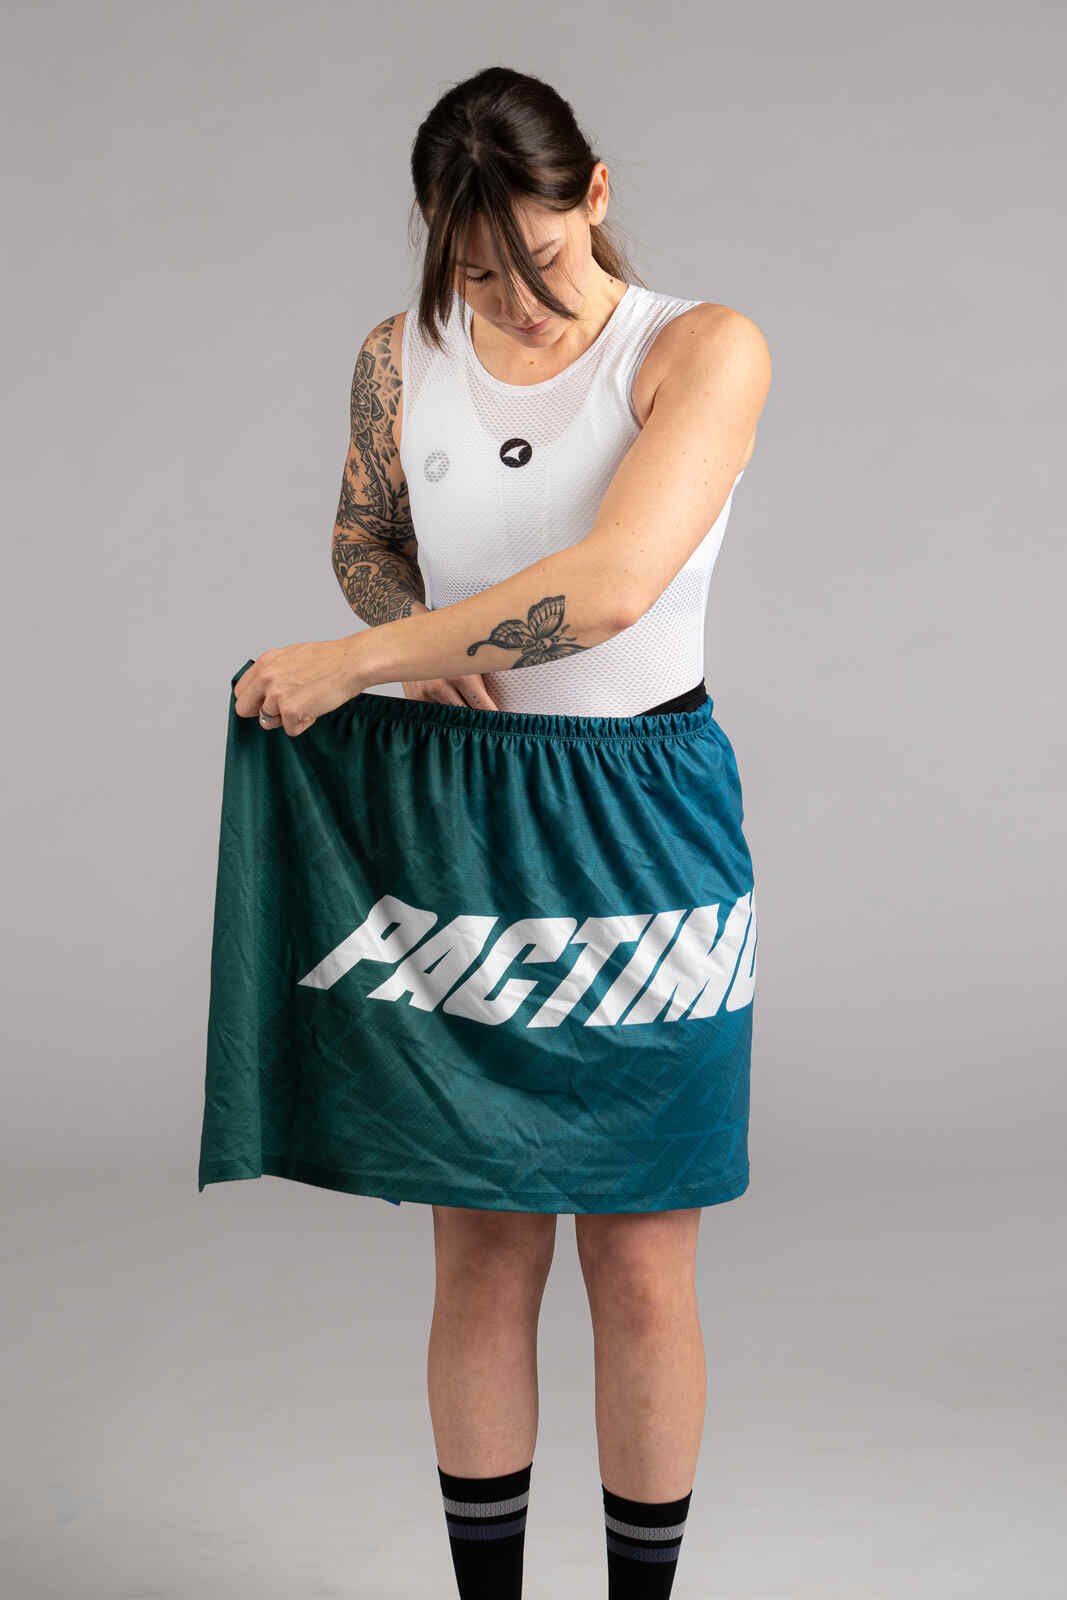 Green Quick Release Cycling Changing Kilt